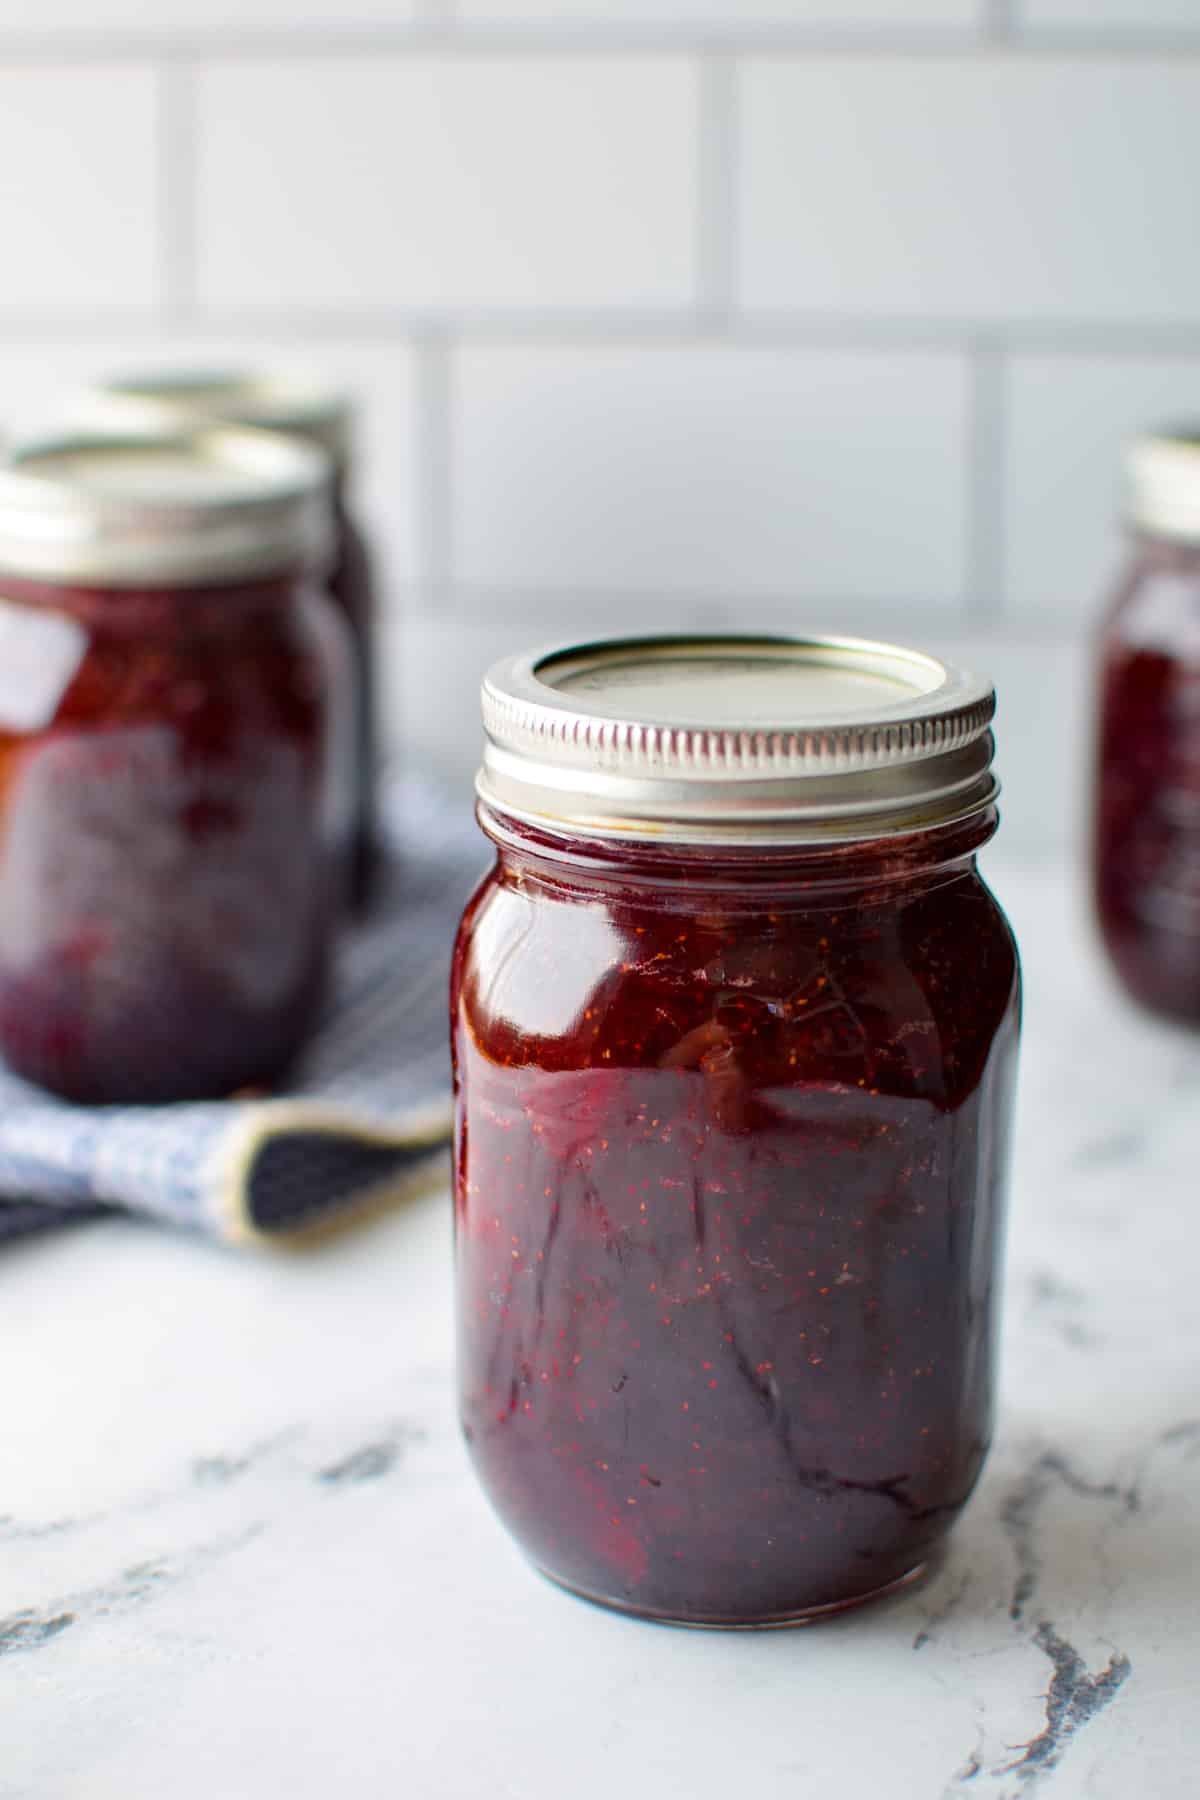 A jar of homemade strawberry jam with other jars in the background.